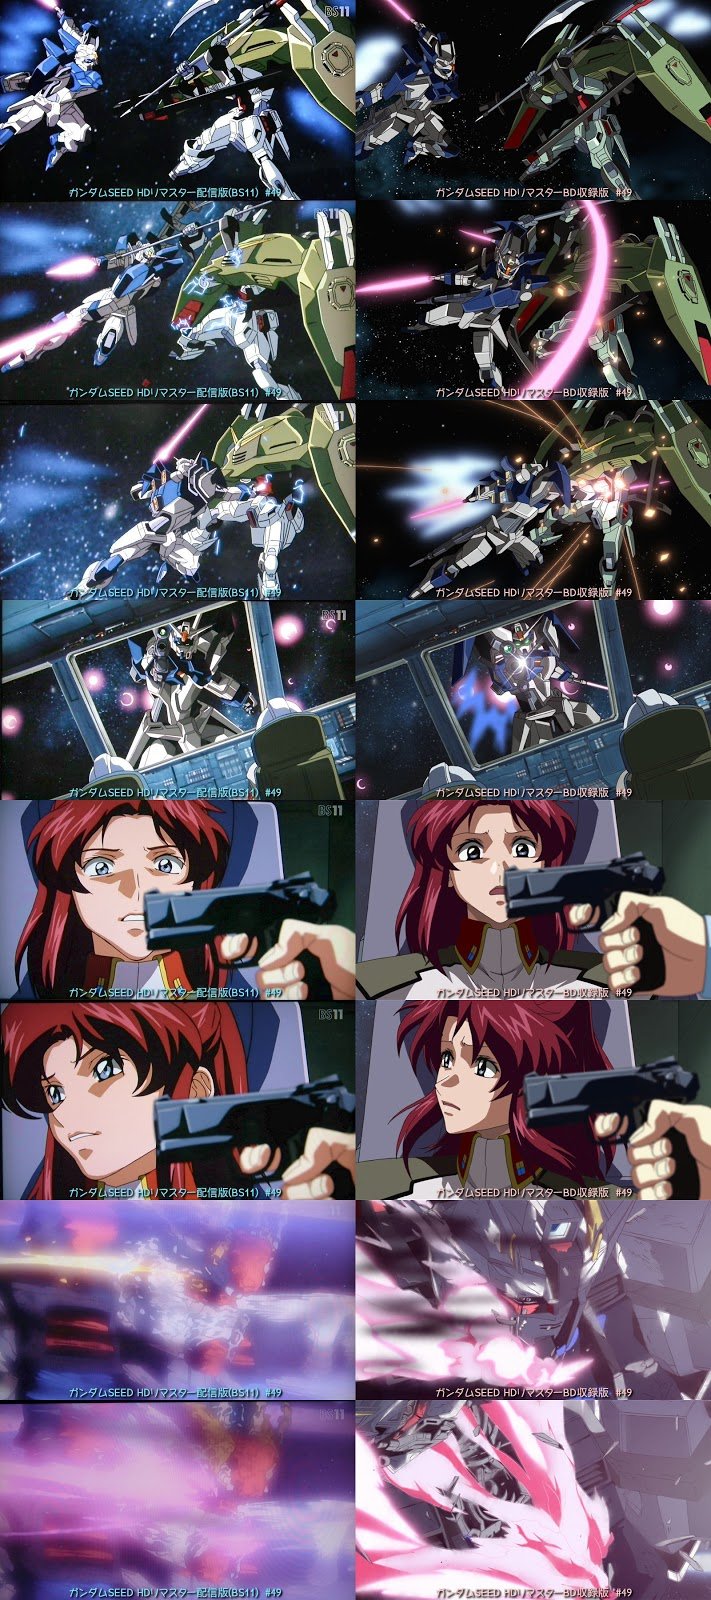 Normanicgrav As Some Folks Have Noticed Nozomi Apparently Used The Tv Re Broadcast Version And Not The Jp Blu Ray Version For Mobile Suit Gundam Seed On Top Of The Black Levels